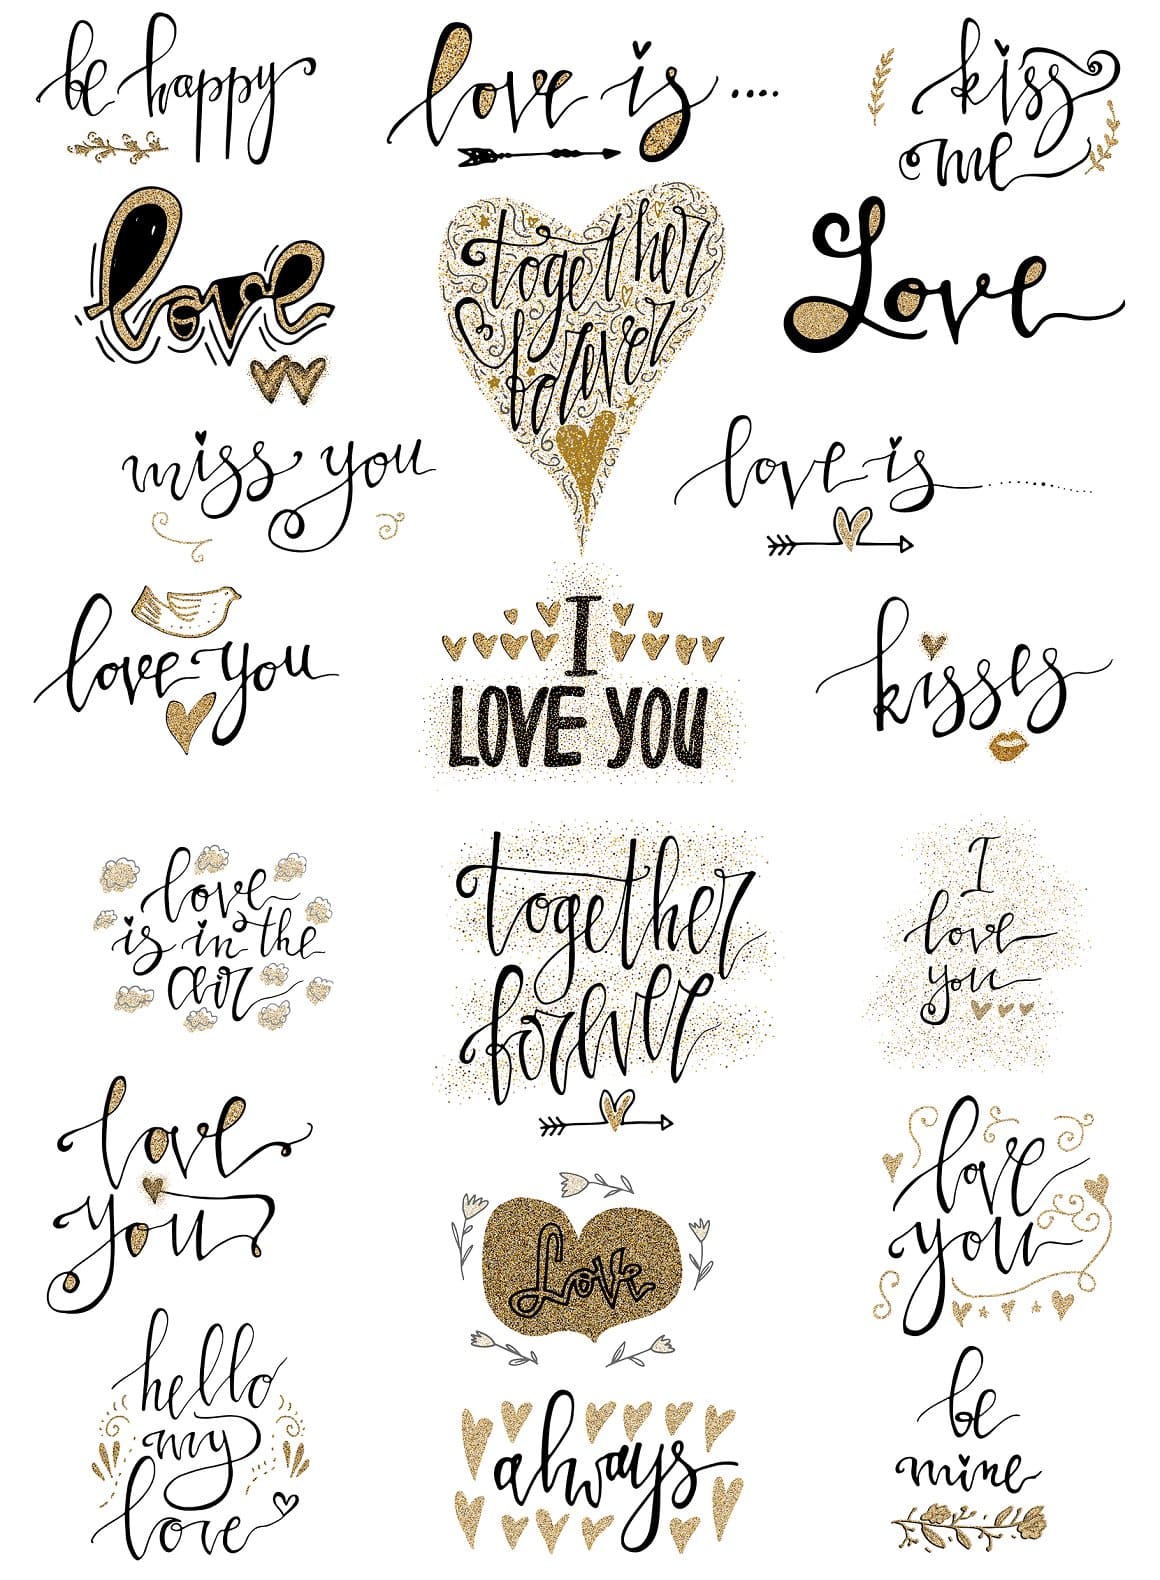 Phrases about love and created with love.